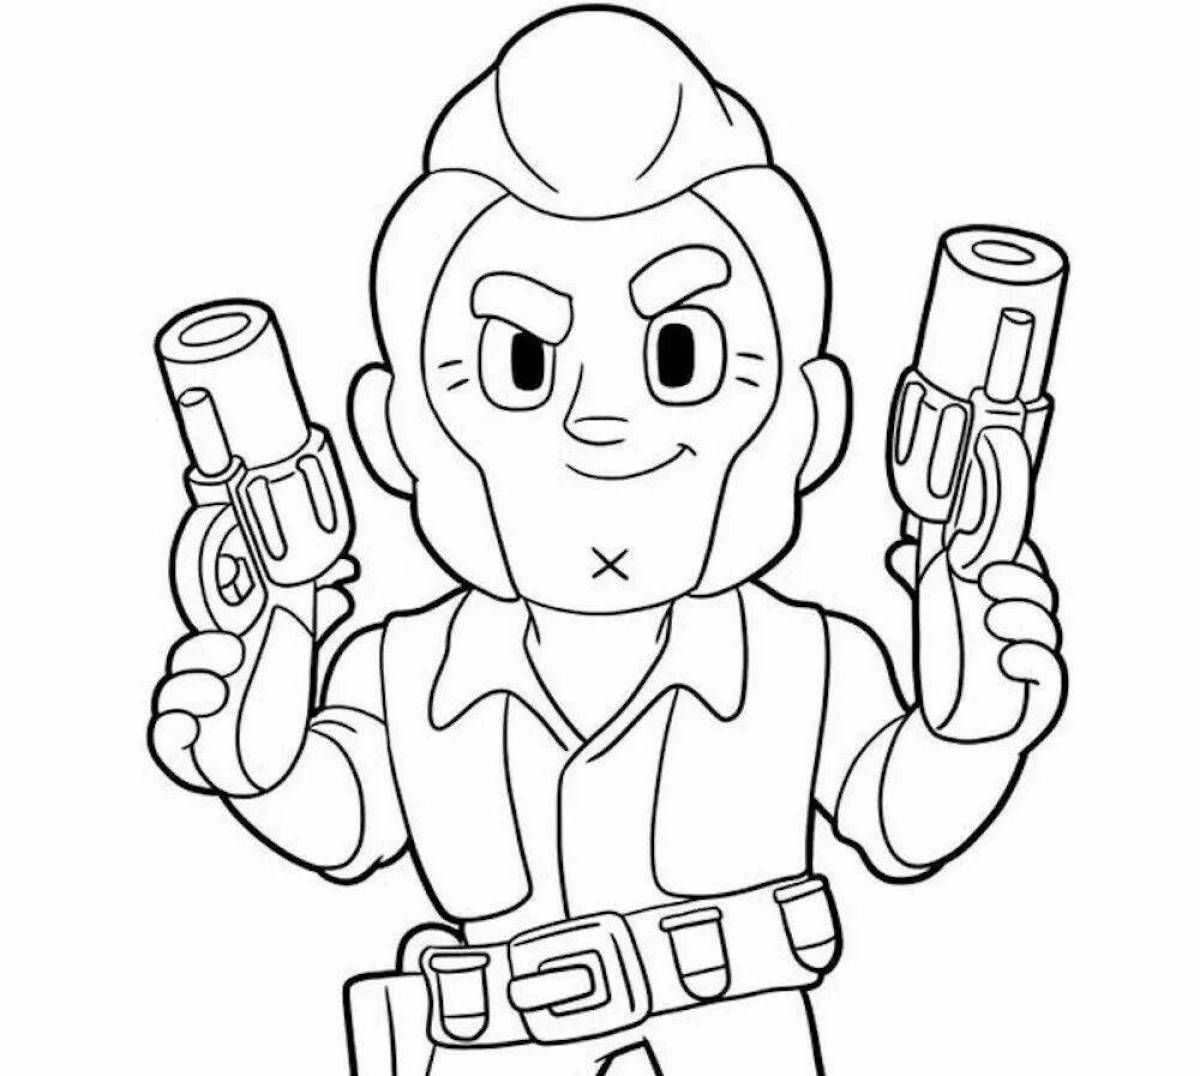 Decisive brawl stars character coloring pages